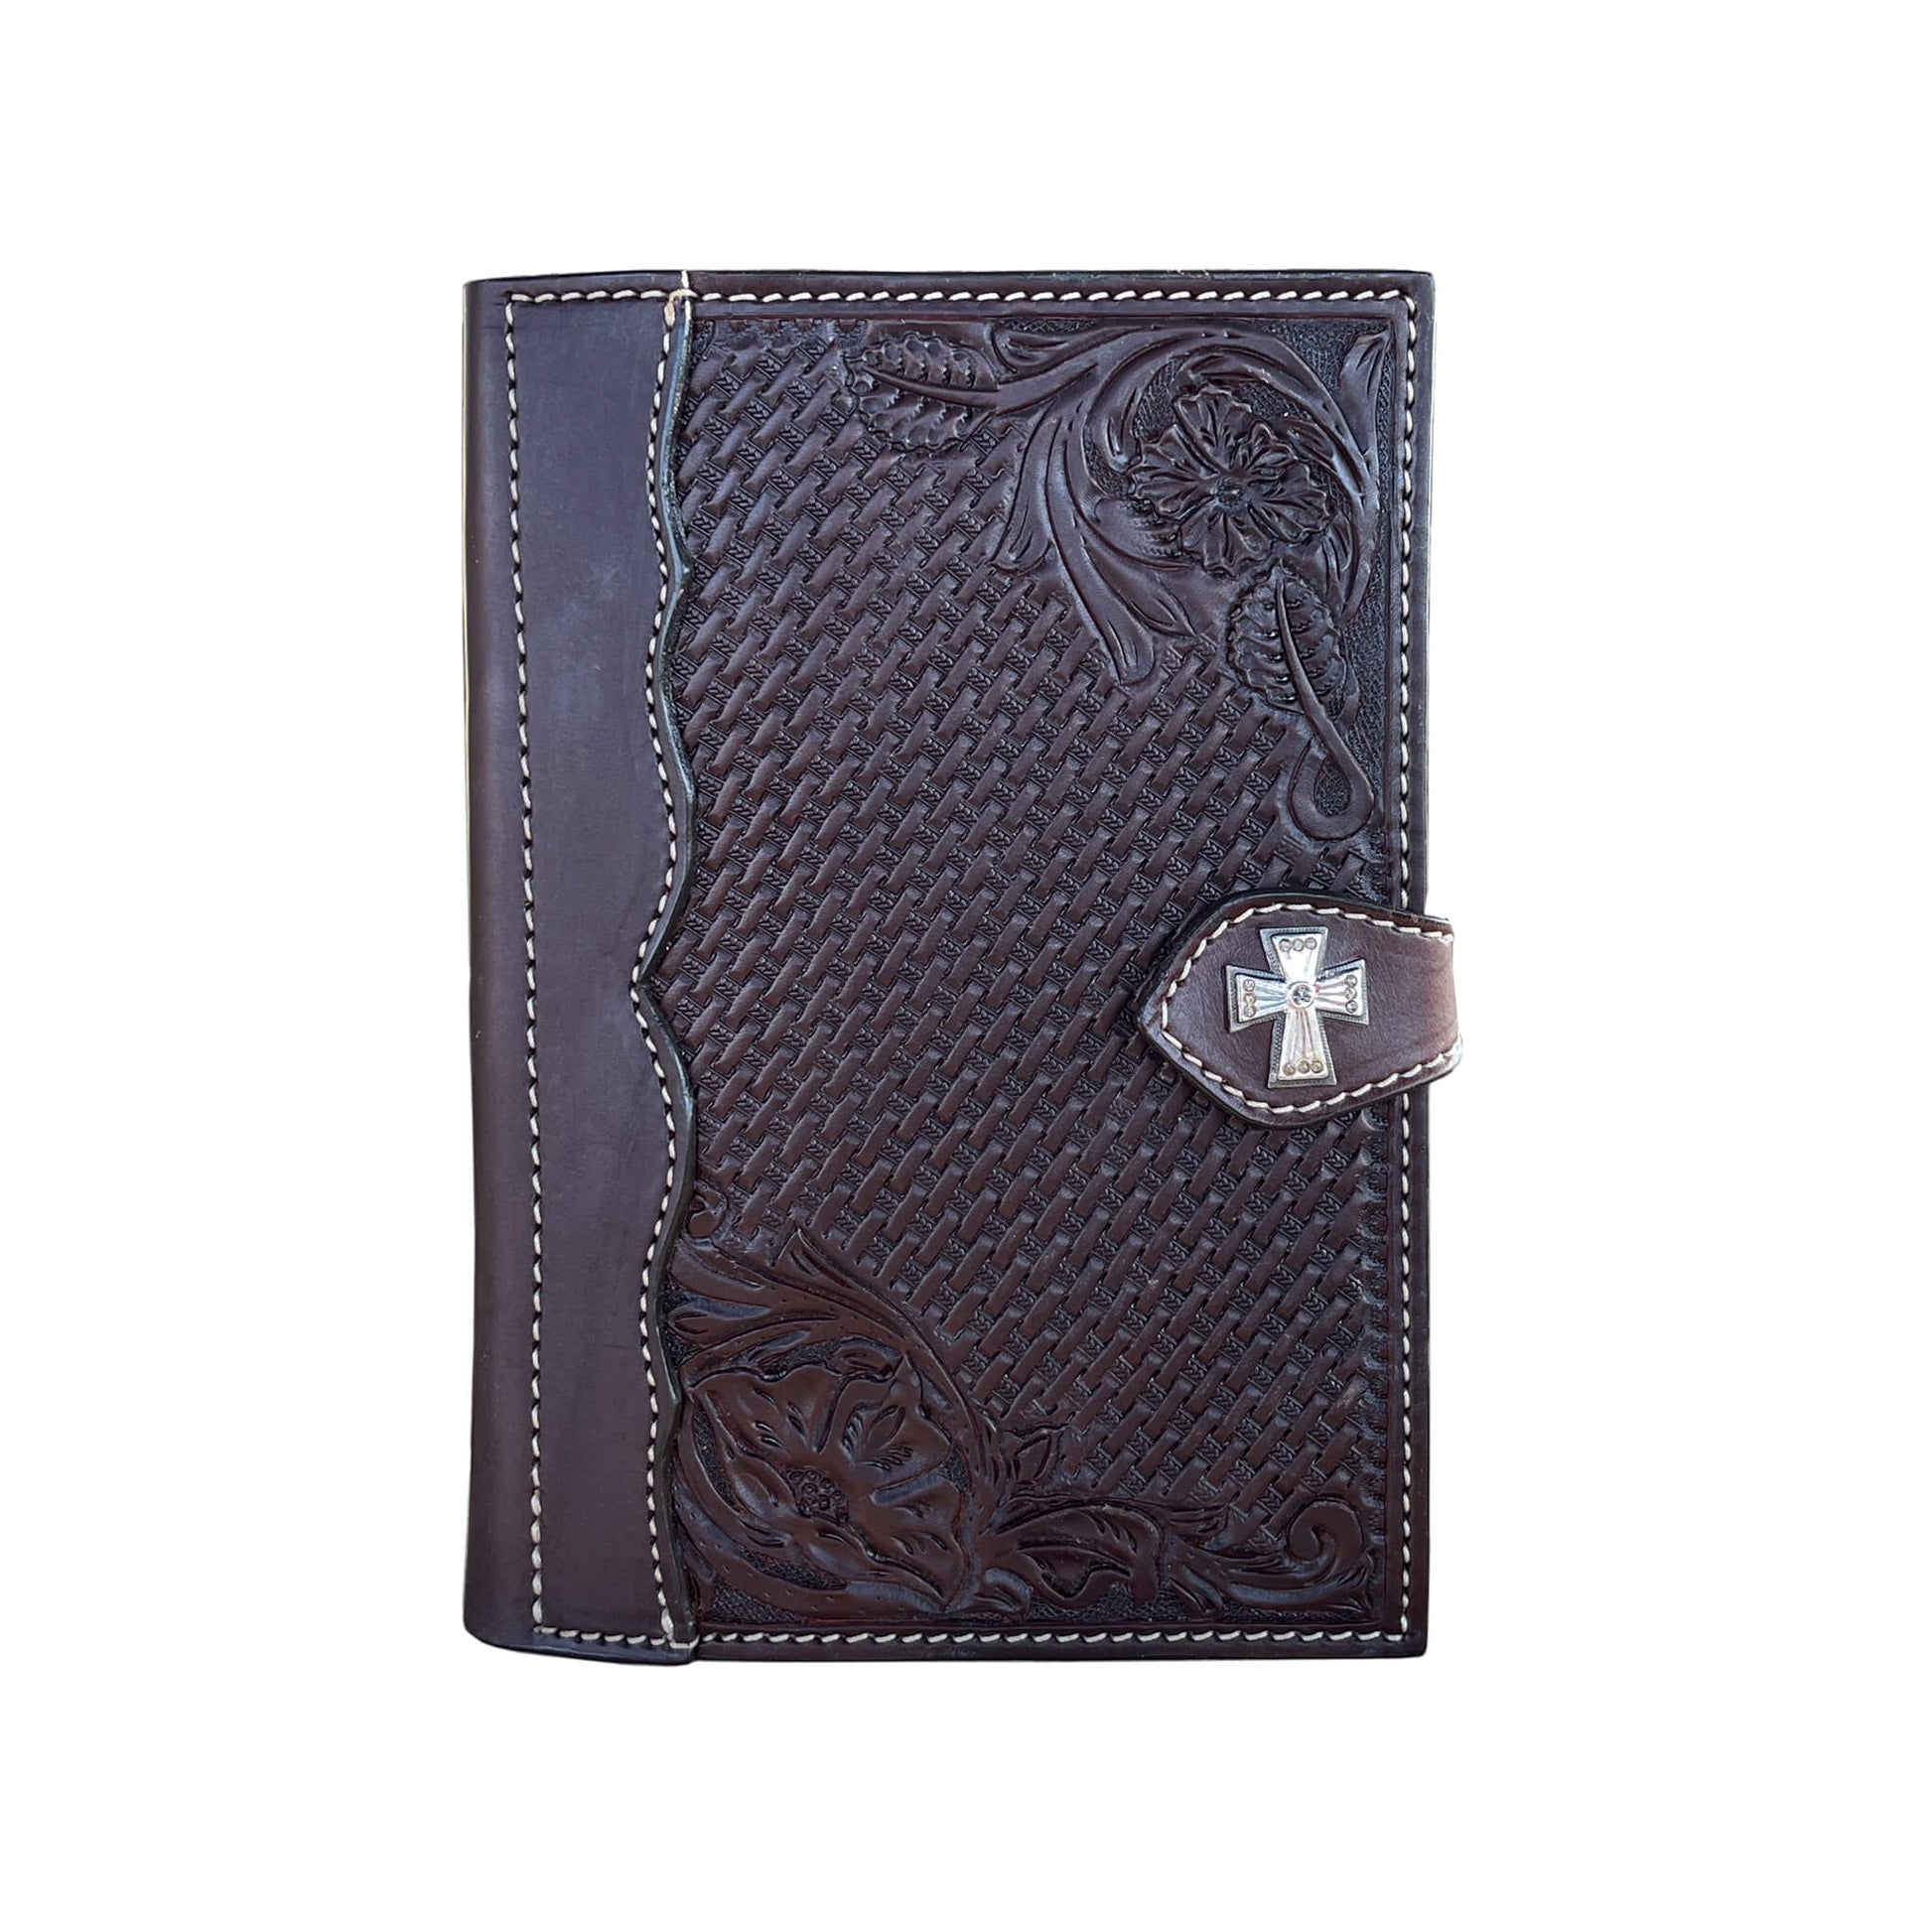 Bible cover chocolate leather basket and wild rose tooling with a #27 concho.